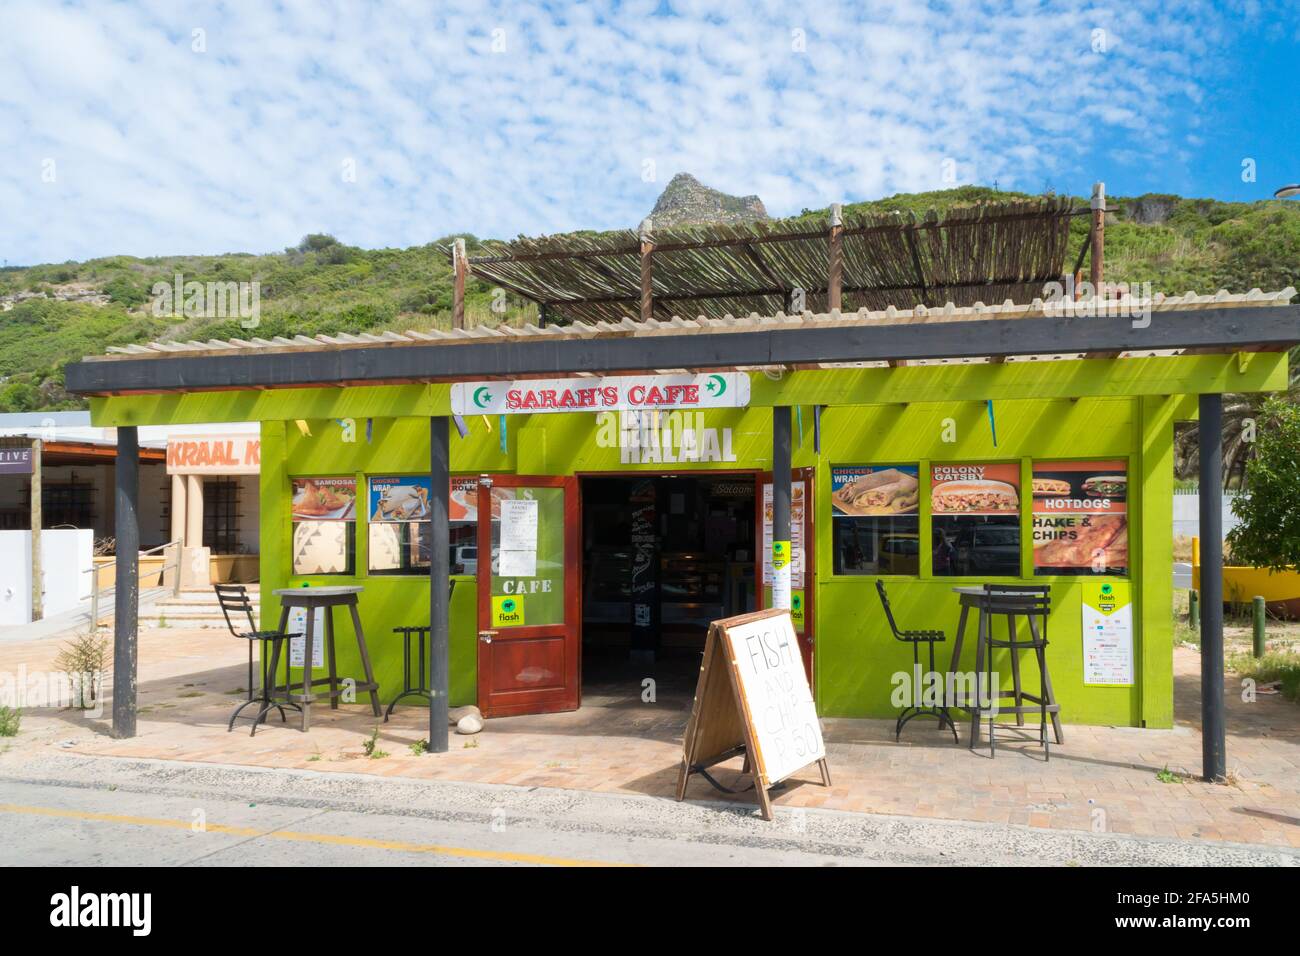 Halal cafe in  Hout Bay, Cape Town, South Africa concept international food and cuisine Stock Photo